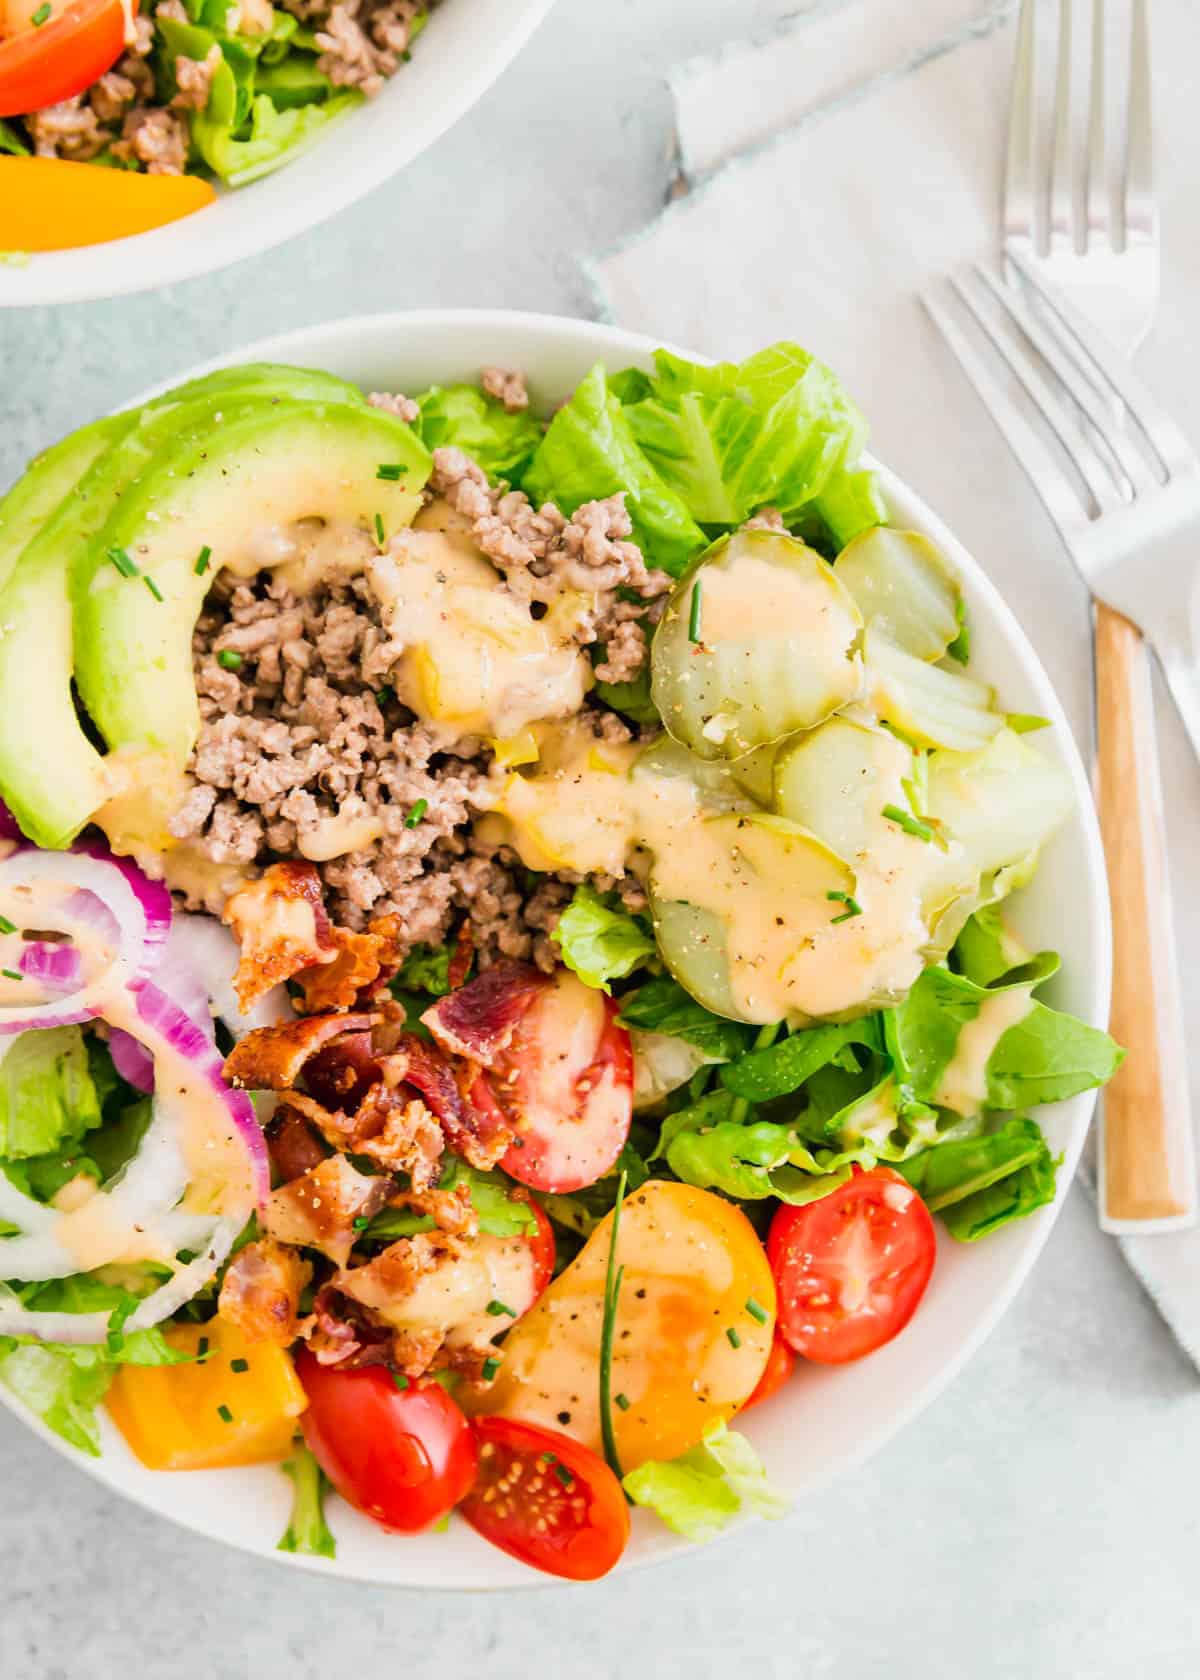 This burger in a bowl includes a homemade special burger sauce. It's got all the toppings and flavors of your favorite burger with a healthier spin!